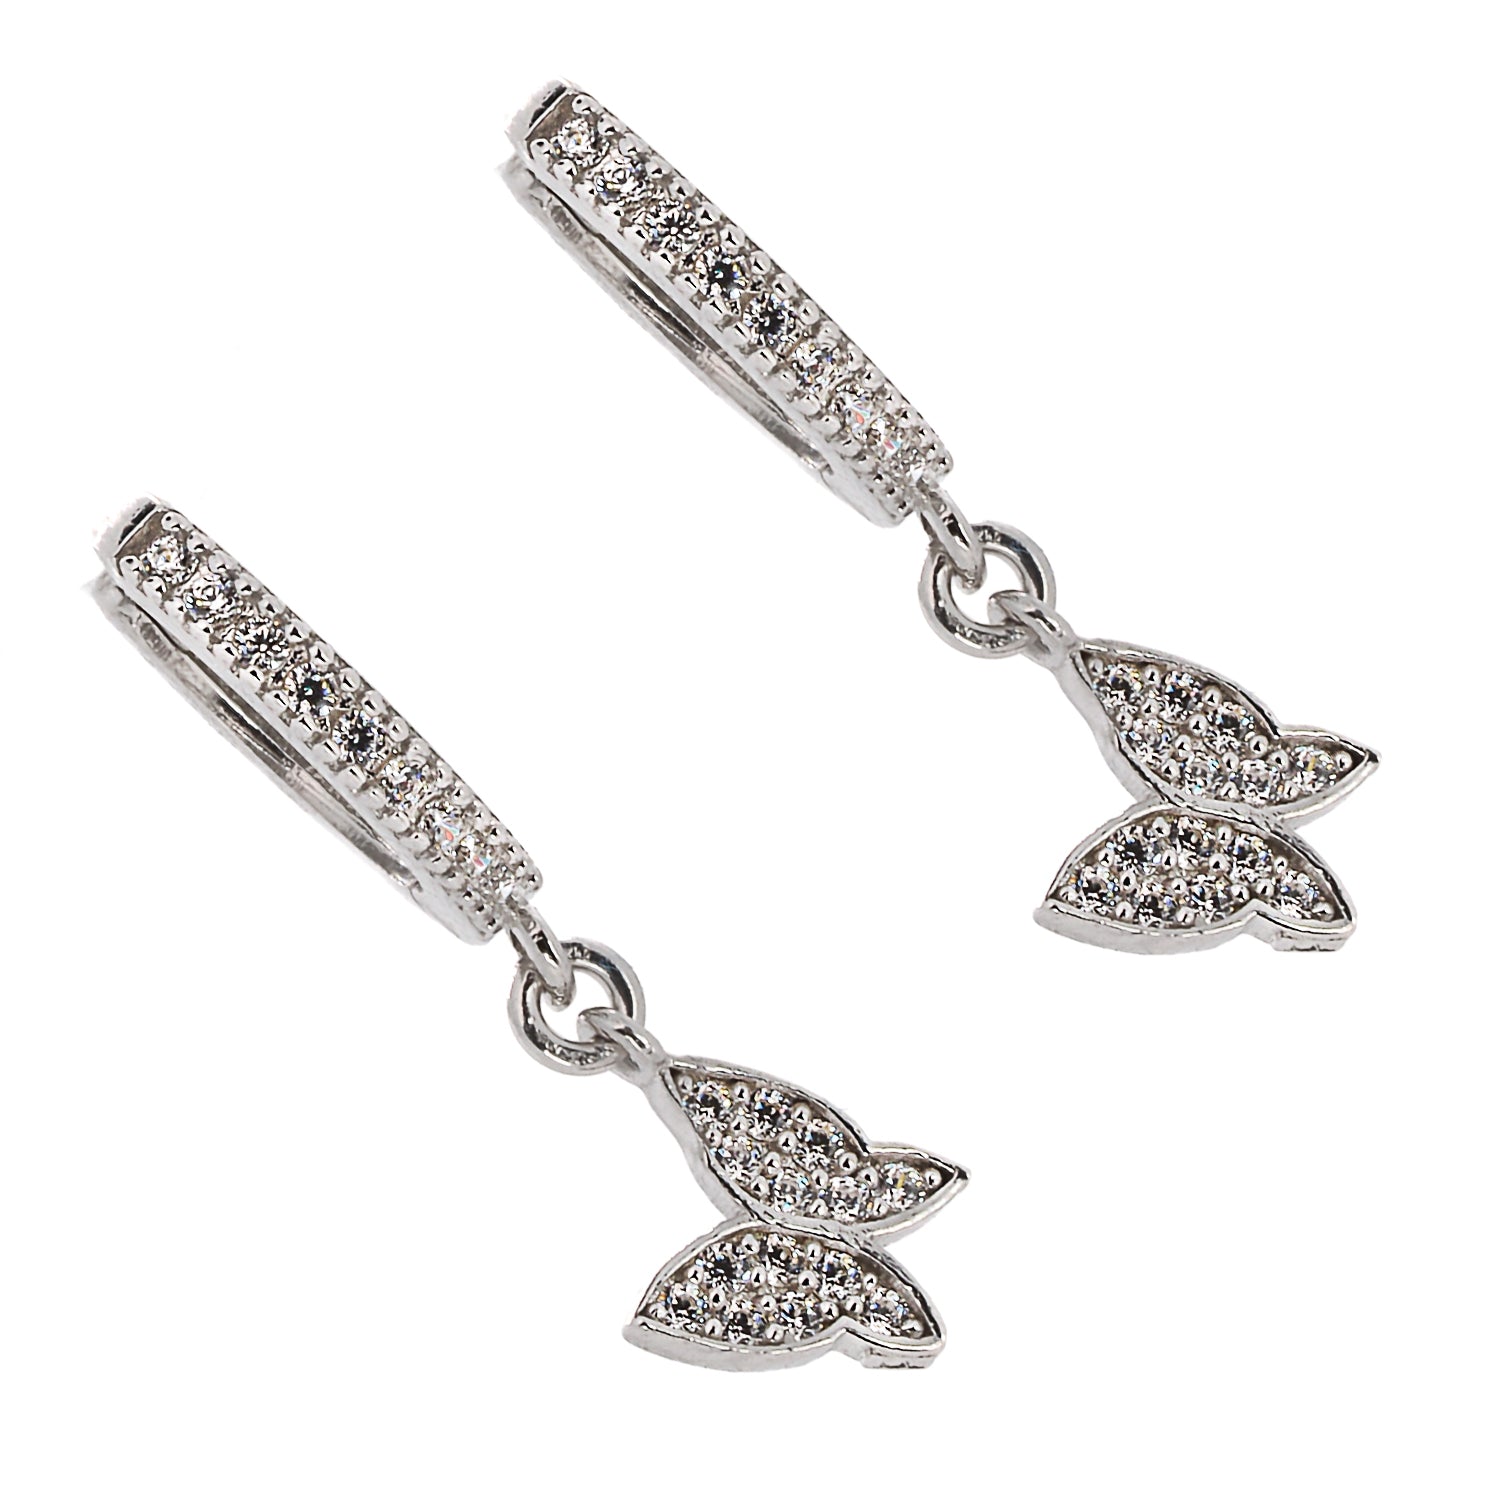 Delicate butterfly design earrings in sterling silver with shimmering CZ diamonds